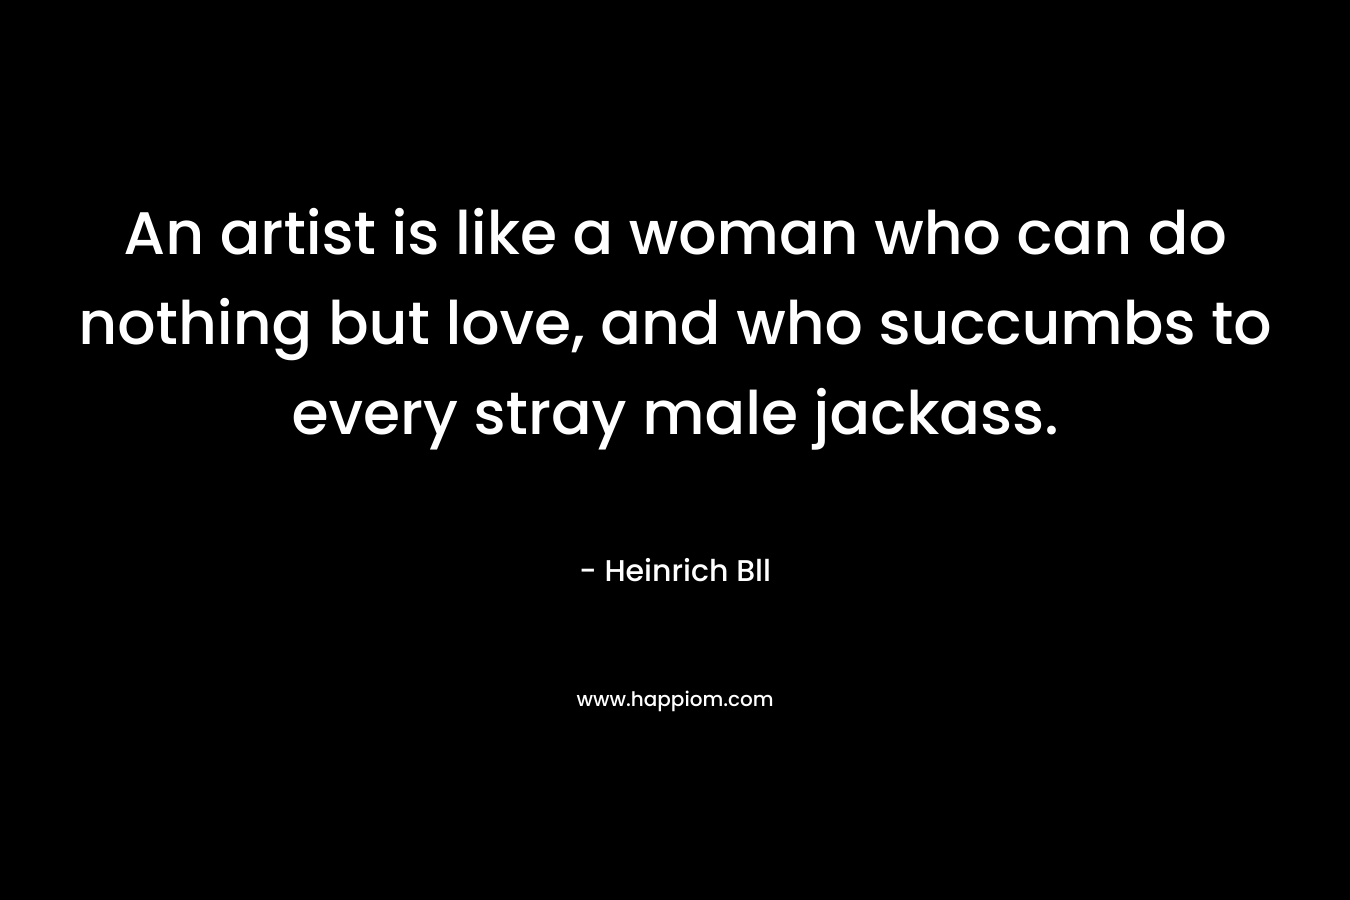 An artist is like a woman who can do nothing but love, and who succumbs to every stray male jackass.